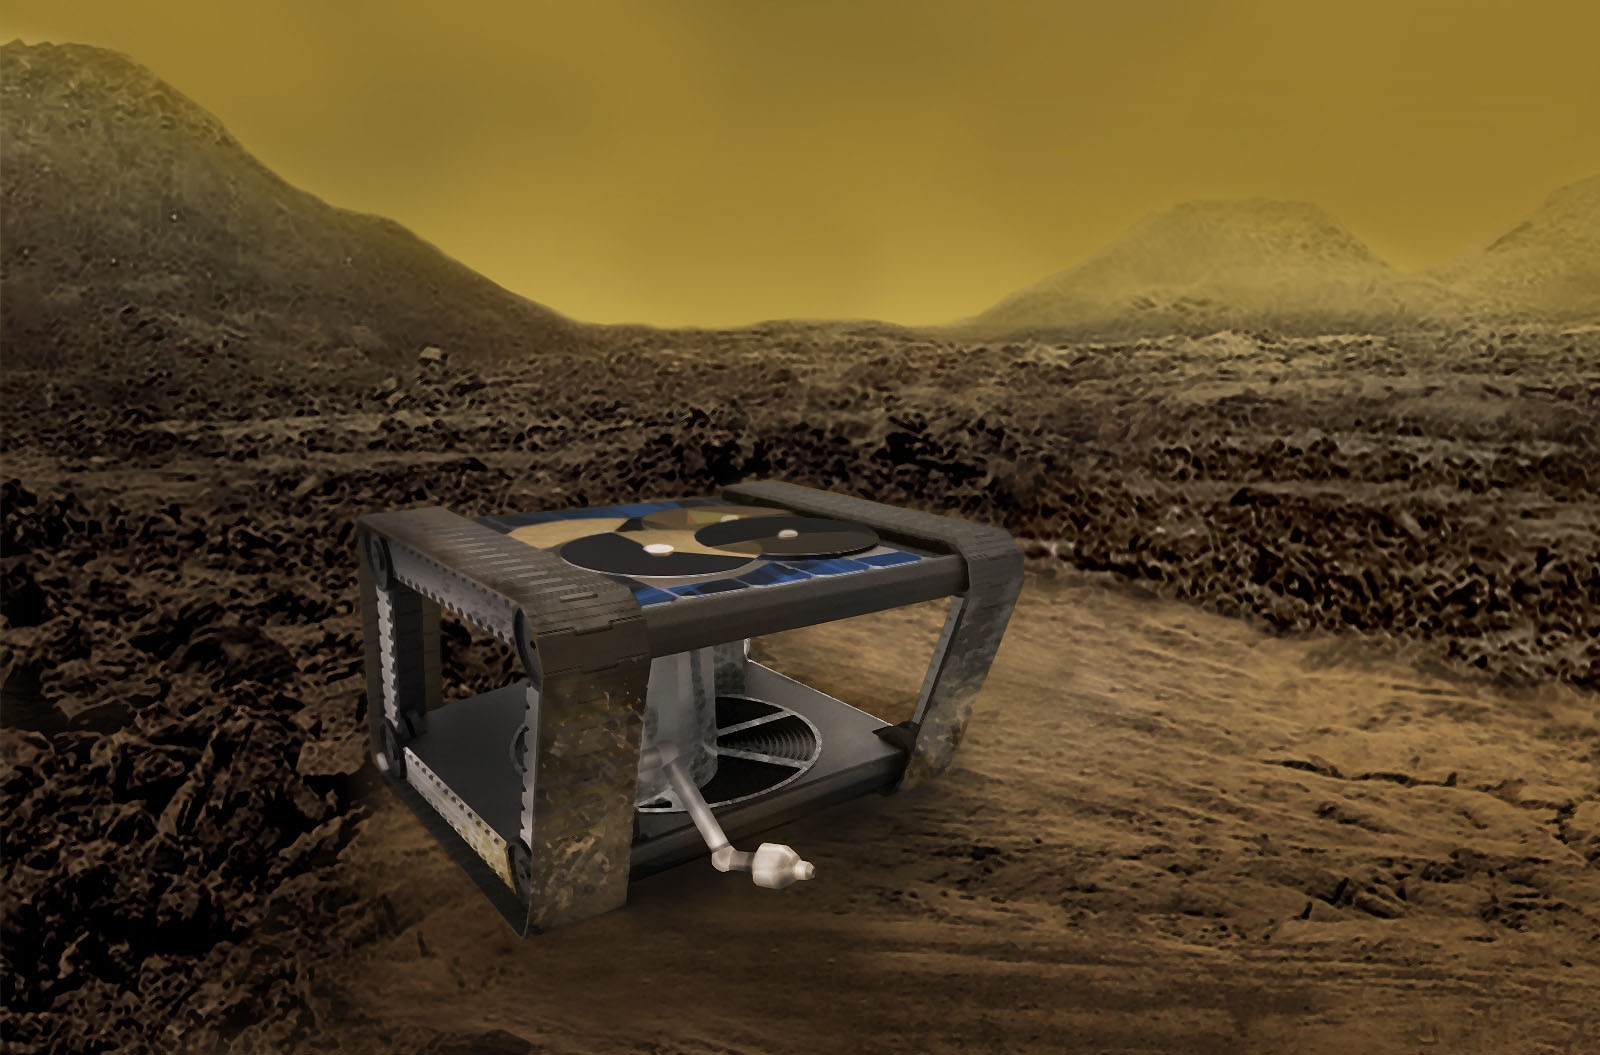 NASA goes Steampunk for its future Venus probes | DeviceDaily.com